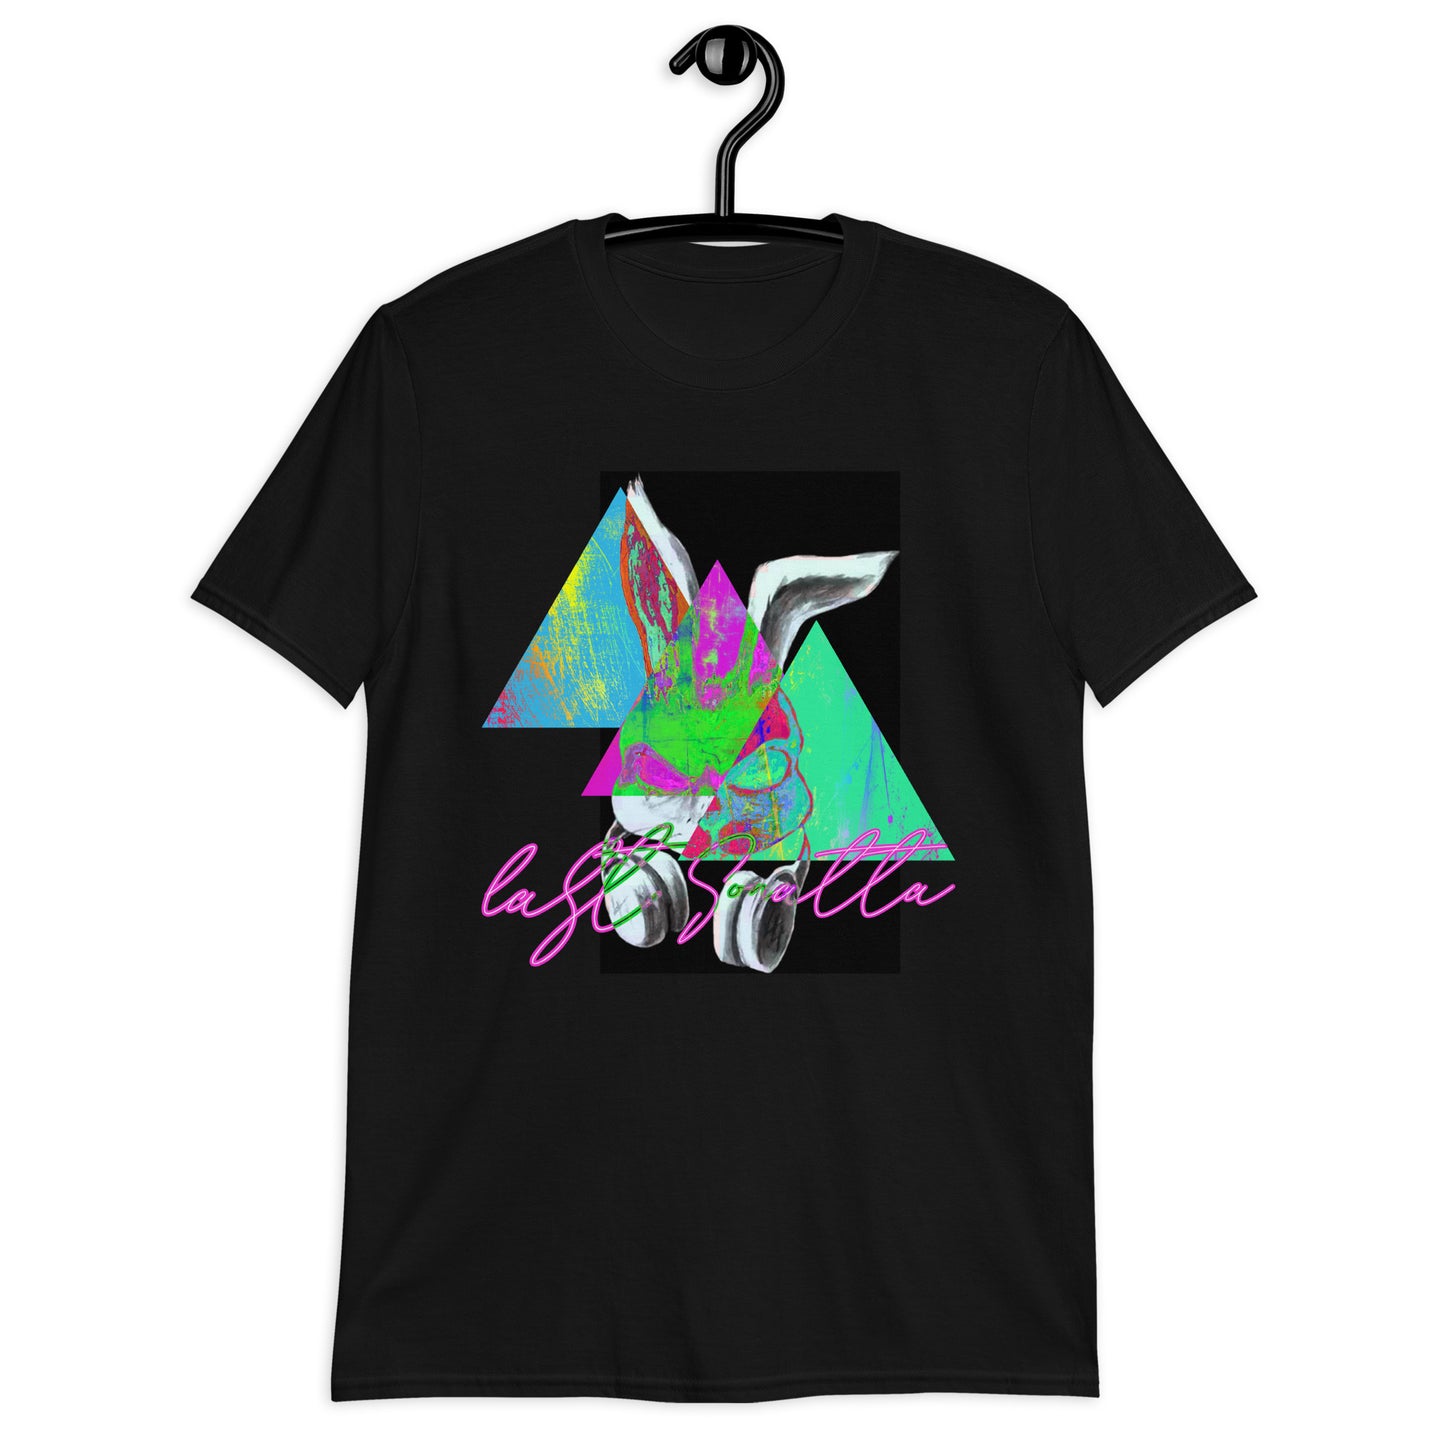 Color My Sound Graphic T-Shirt, Premium Graphic Tees, Cool Design T Shirts,  Streetwear Casual Summer Tops T-Shirt Unisex